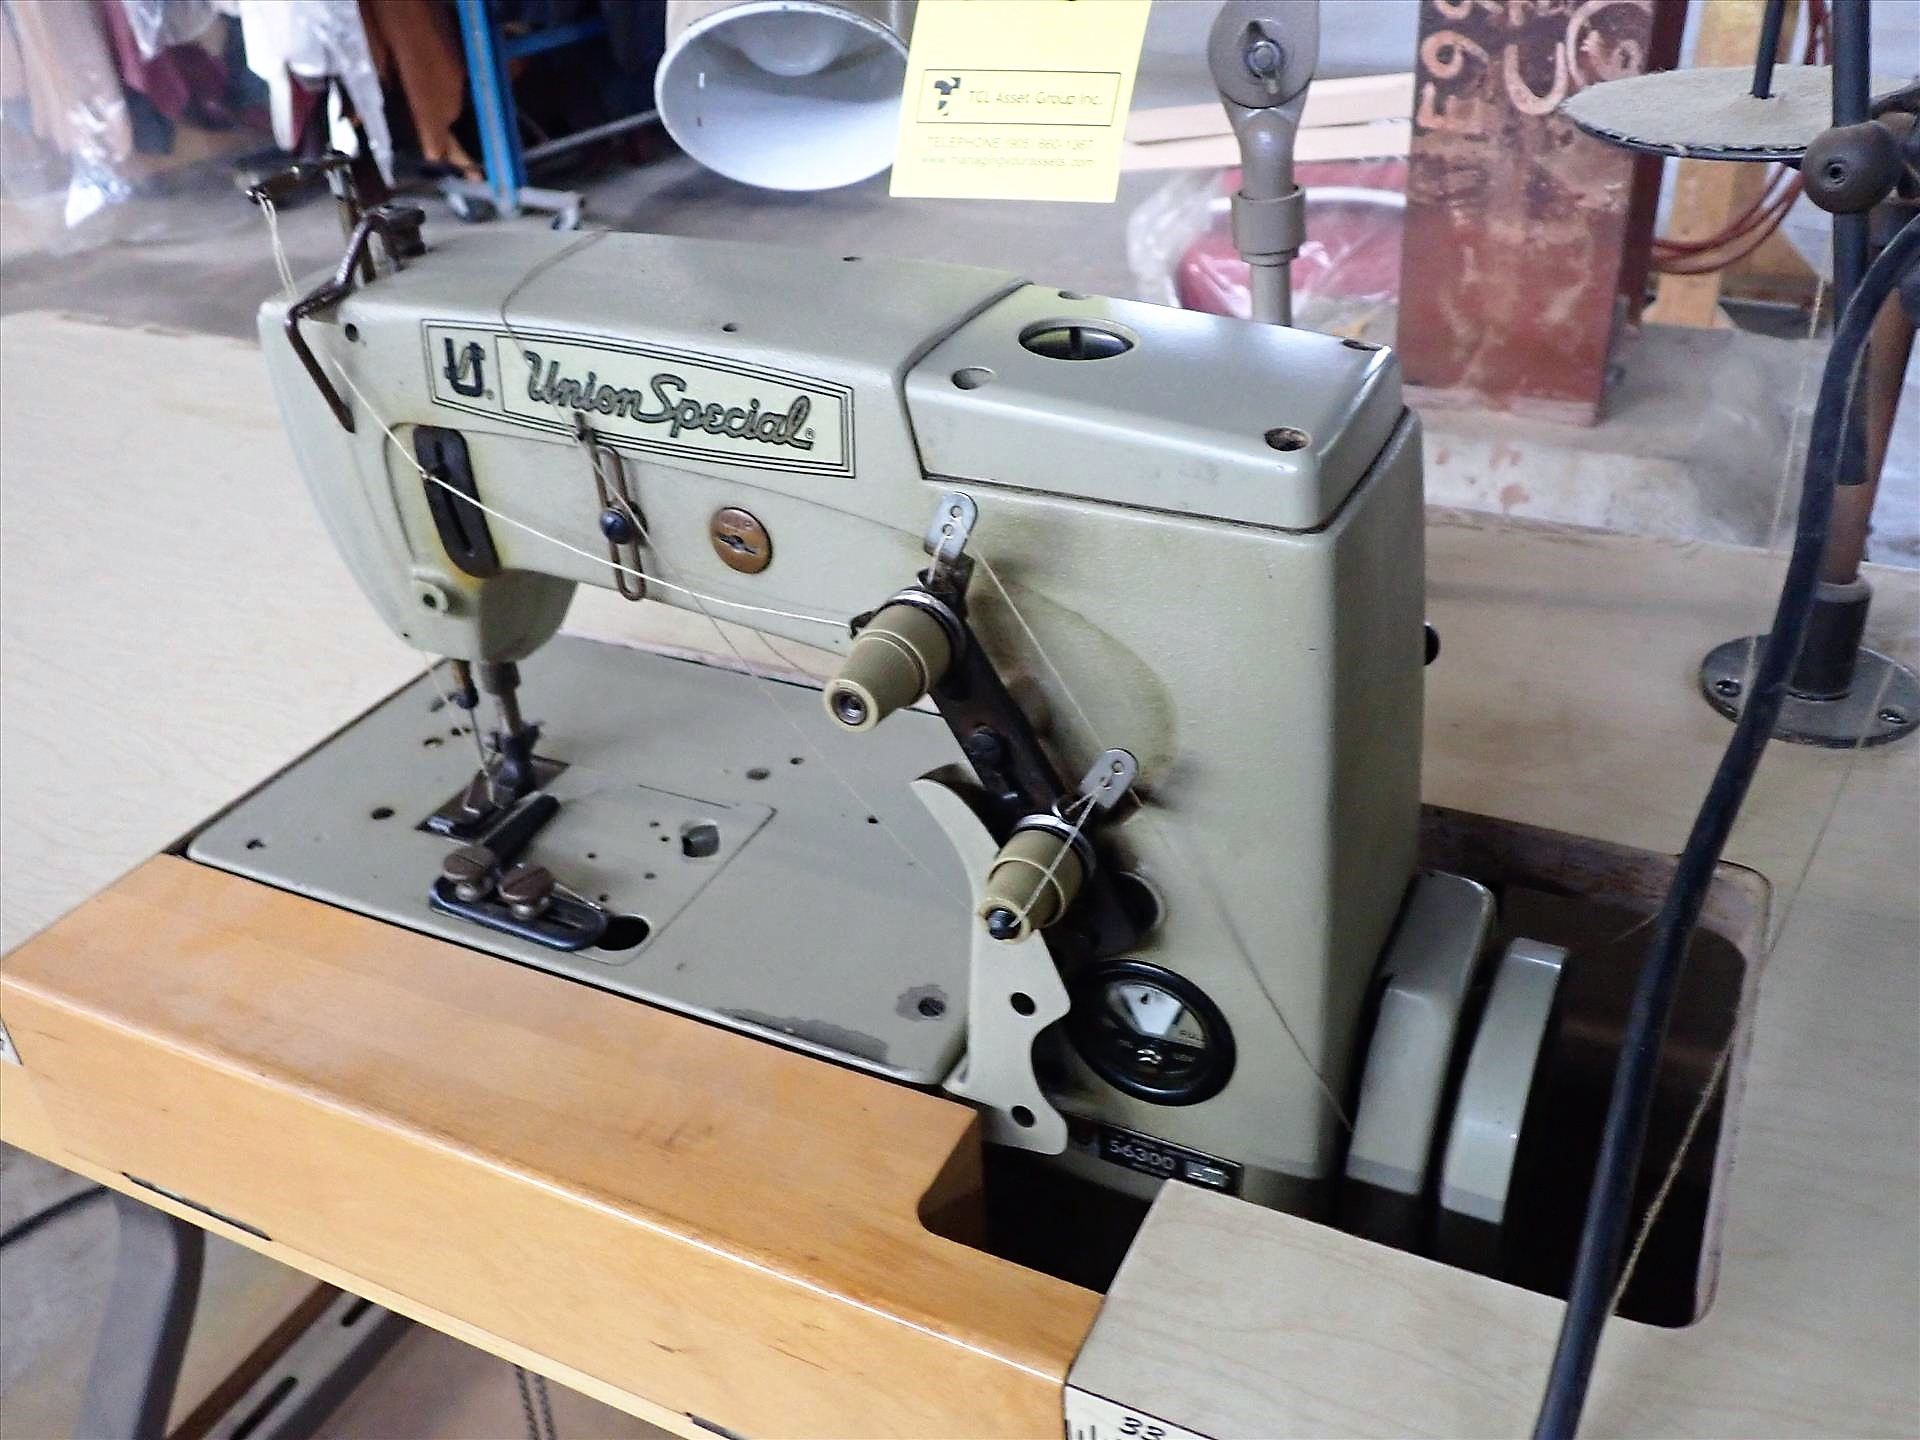 UnionSpecial industrial sewing machine, mod. 56300AU, 8 in. throat, 1/2 hp c/w 20 in. x 48 in. - Image 2 of 5